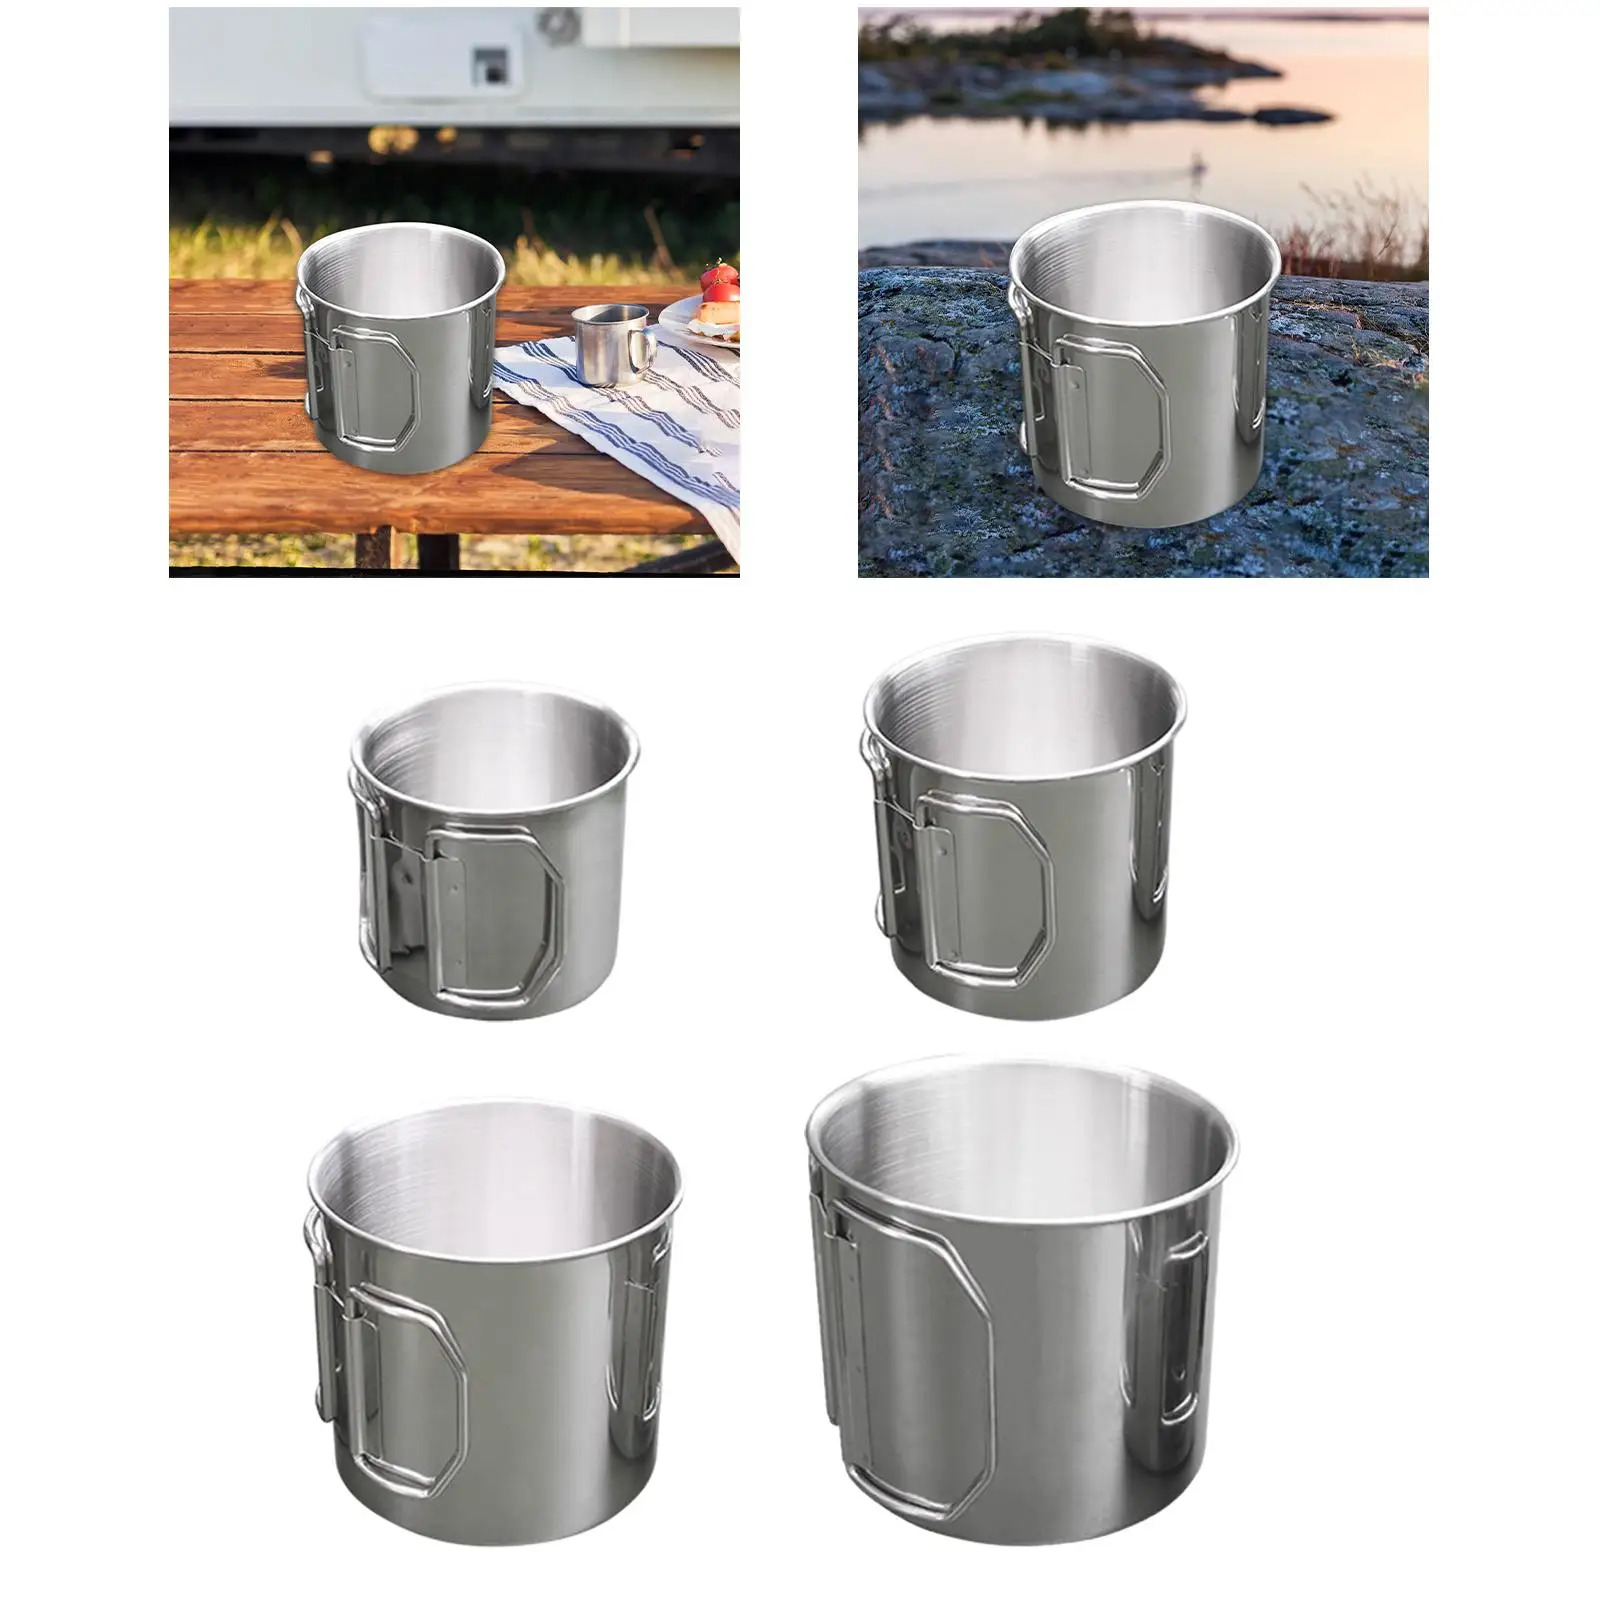 Camping Mug Multipurpose Coffee Tea Cups Stainless Steel Bottle for Recreational Barbecue Hiking Boating Climbing Picnics